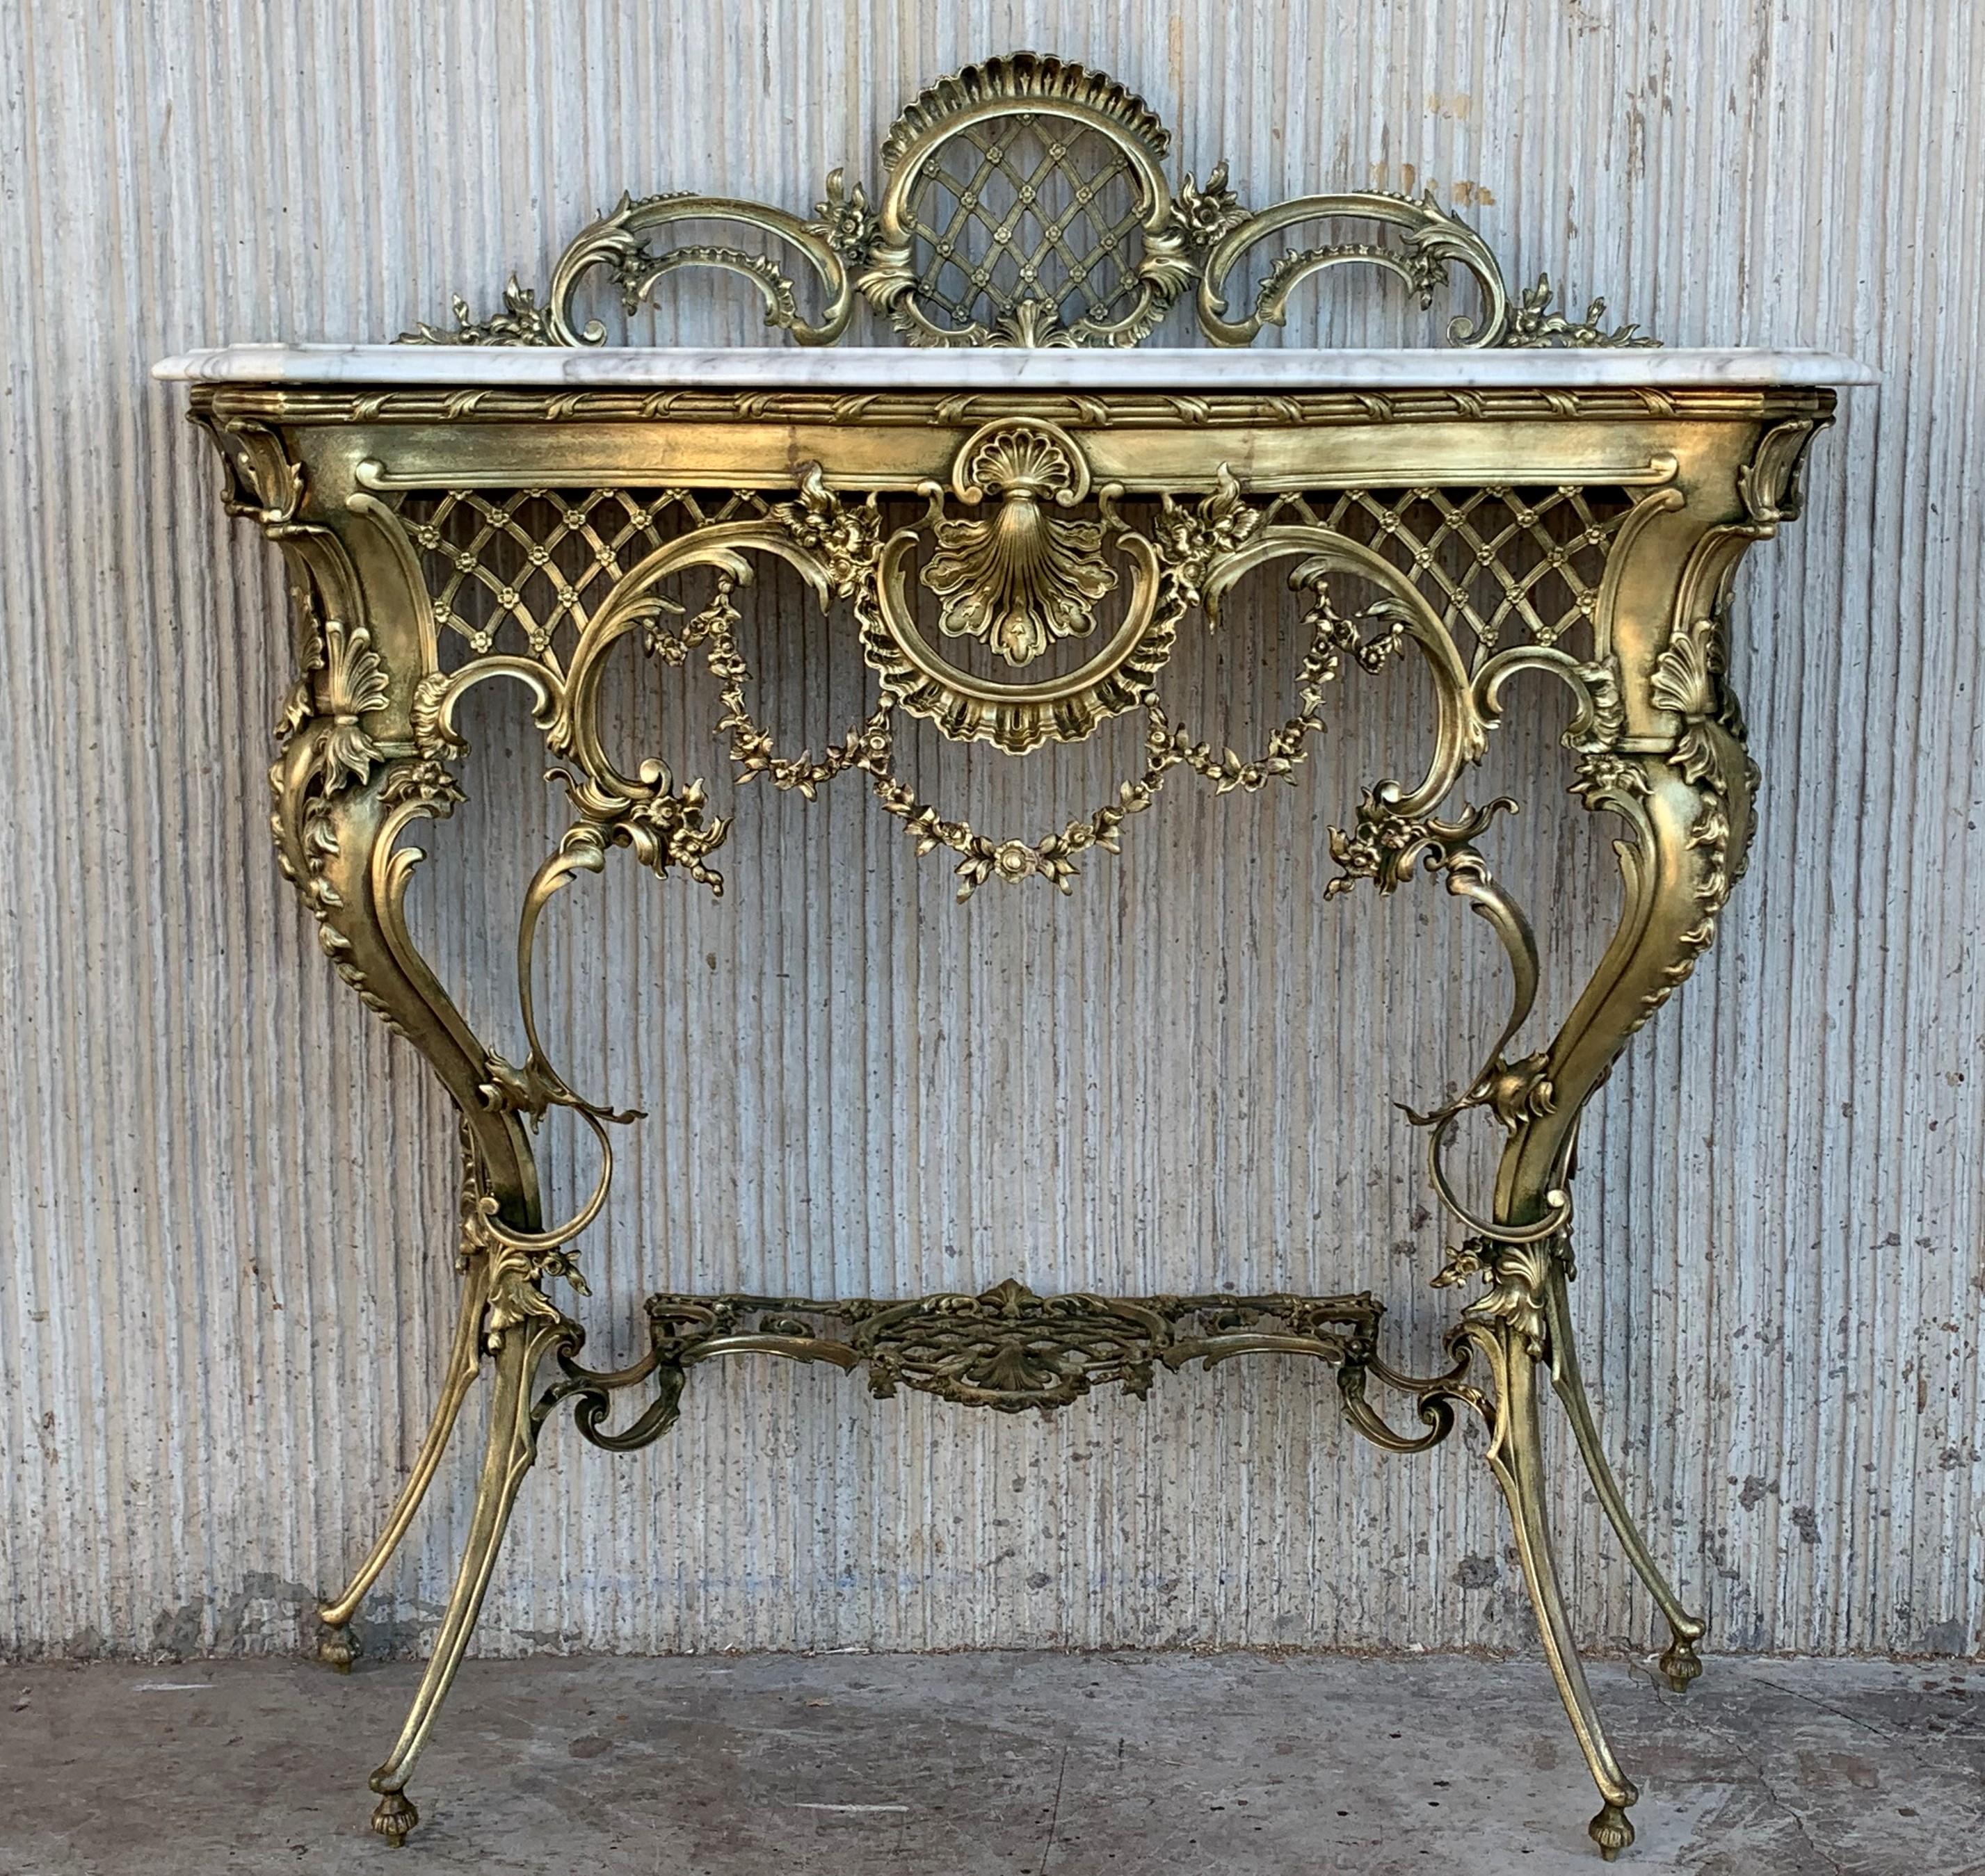 Baroque 19th Century French Bronze Console Table or Vanity with White Marble Top and Cre